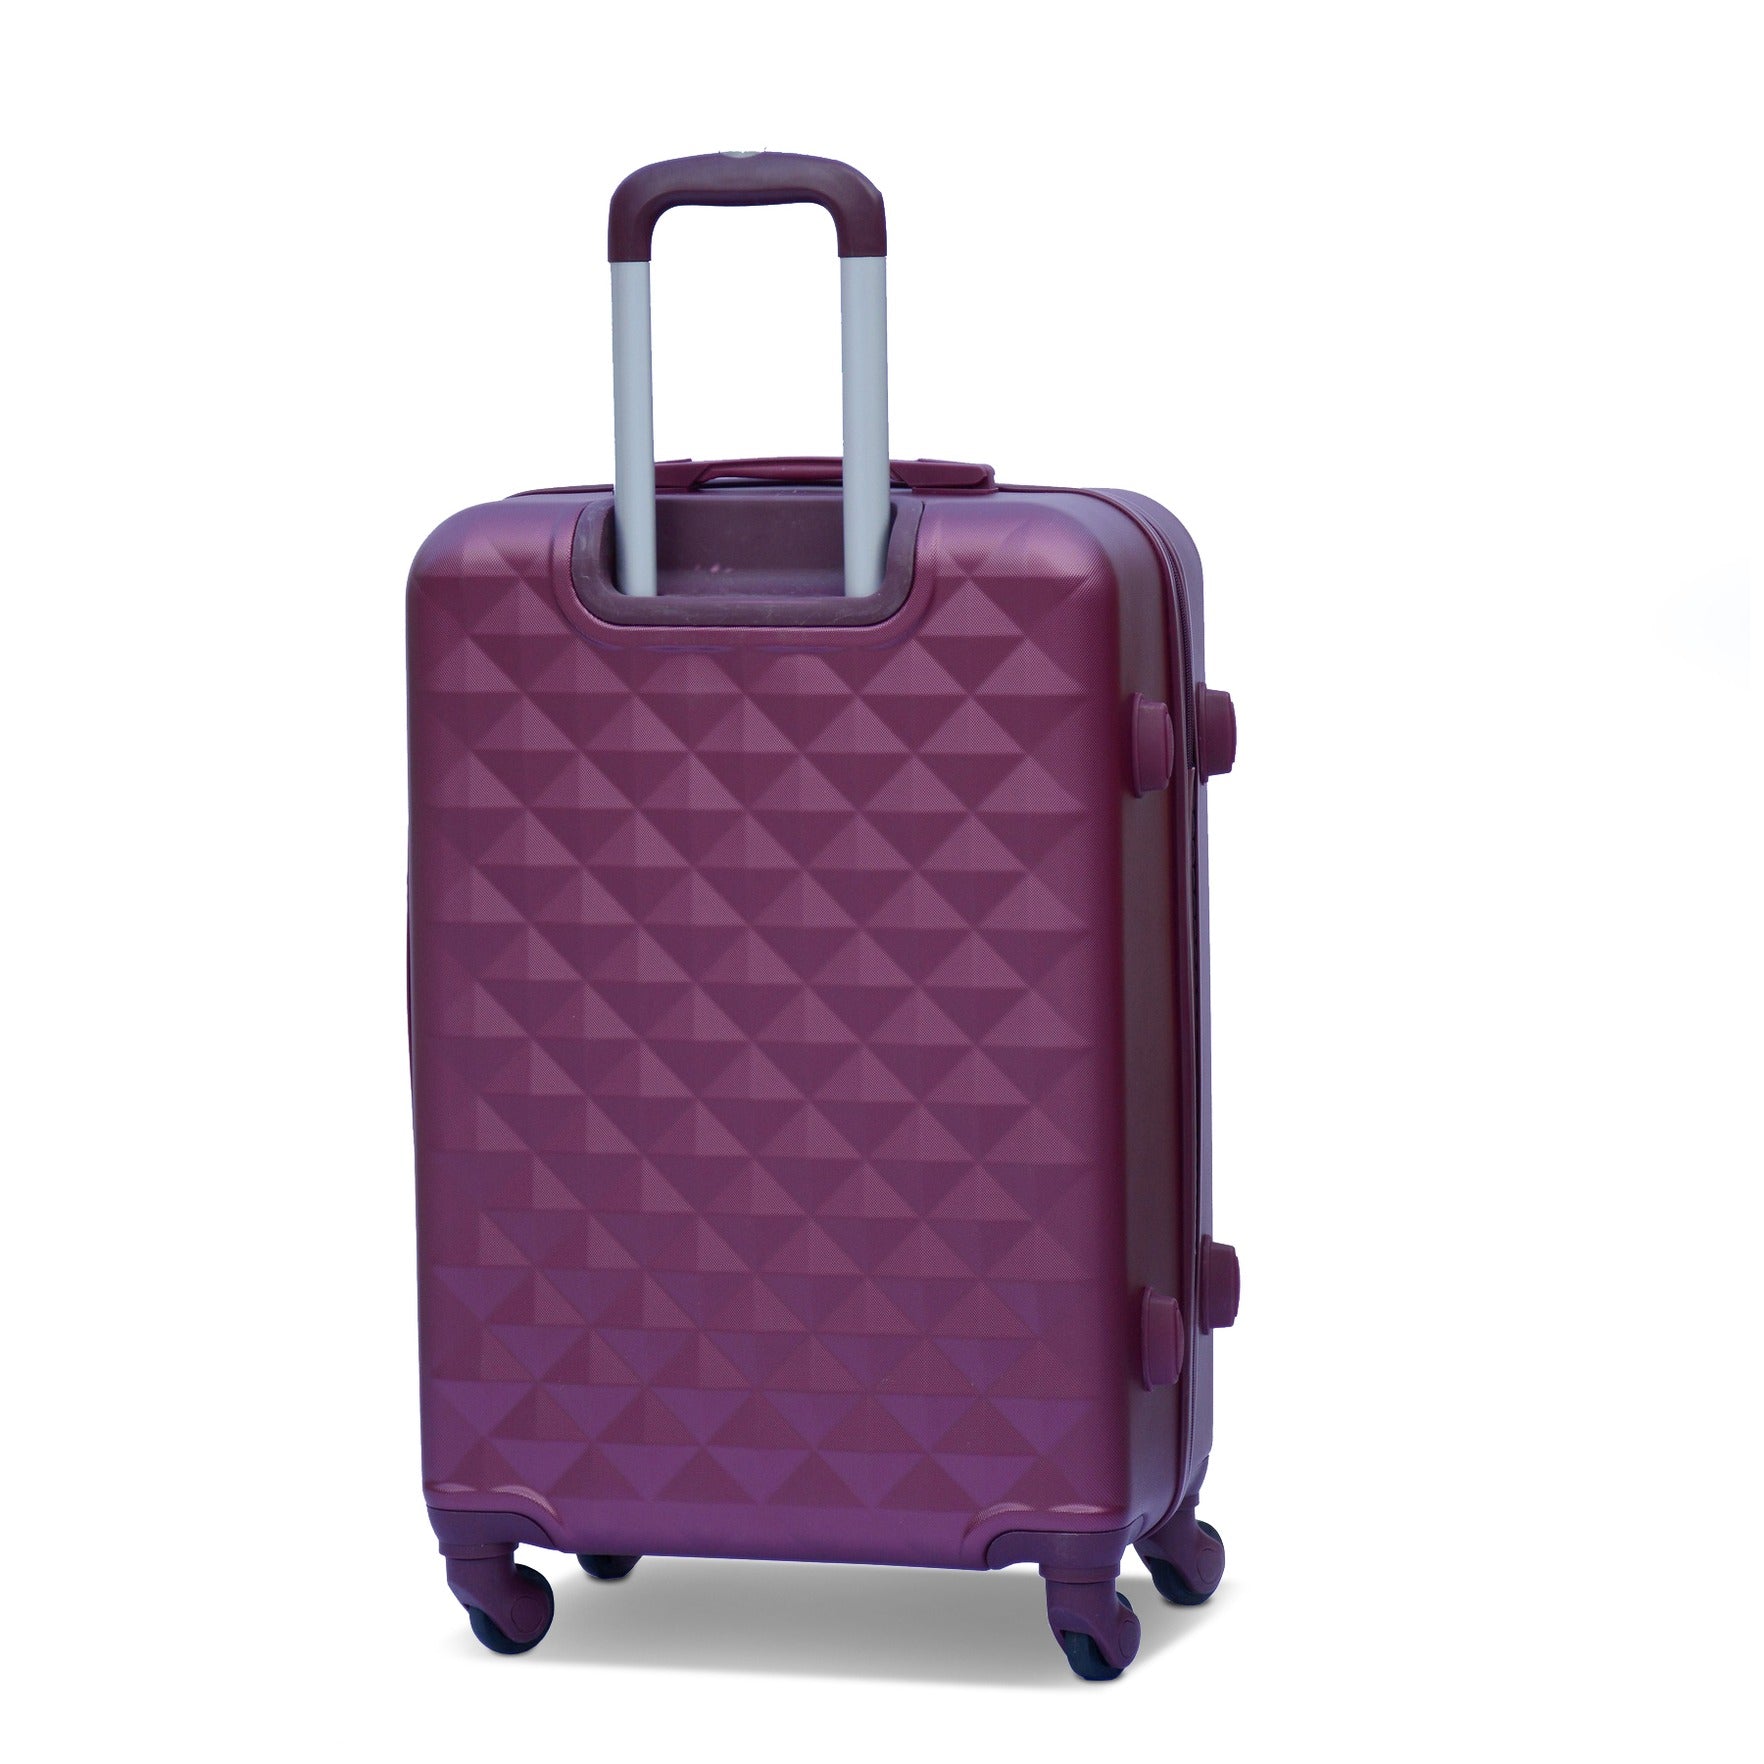 24" Maroon Colour Diamond Cut ABS Lightweight Luggage Bag With Spinner Wheel Zaappy.com